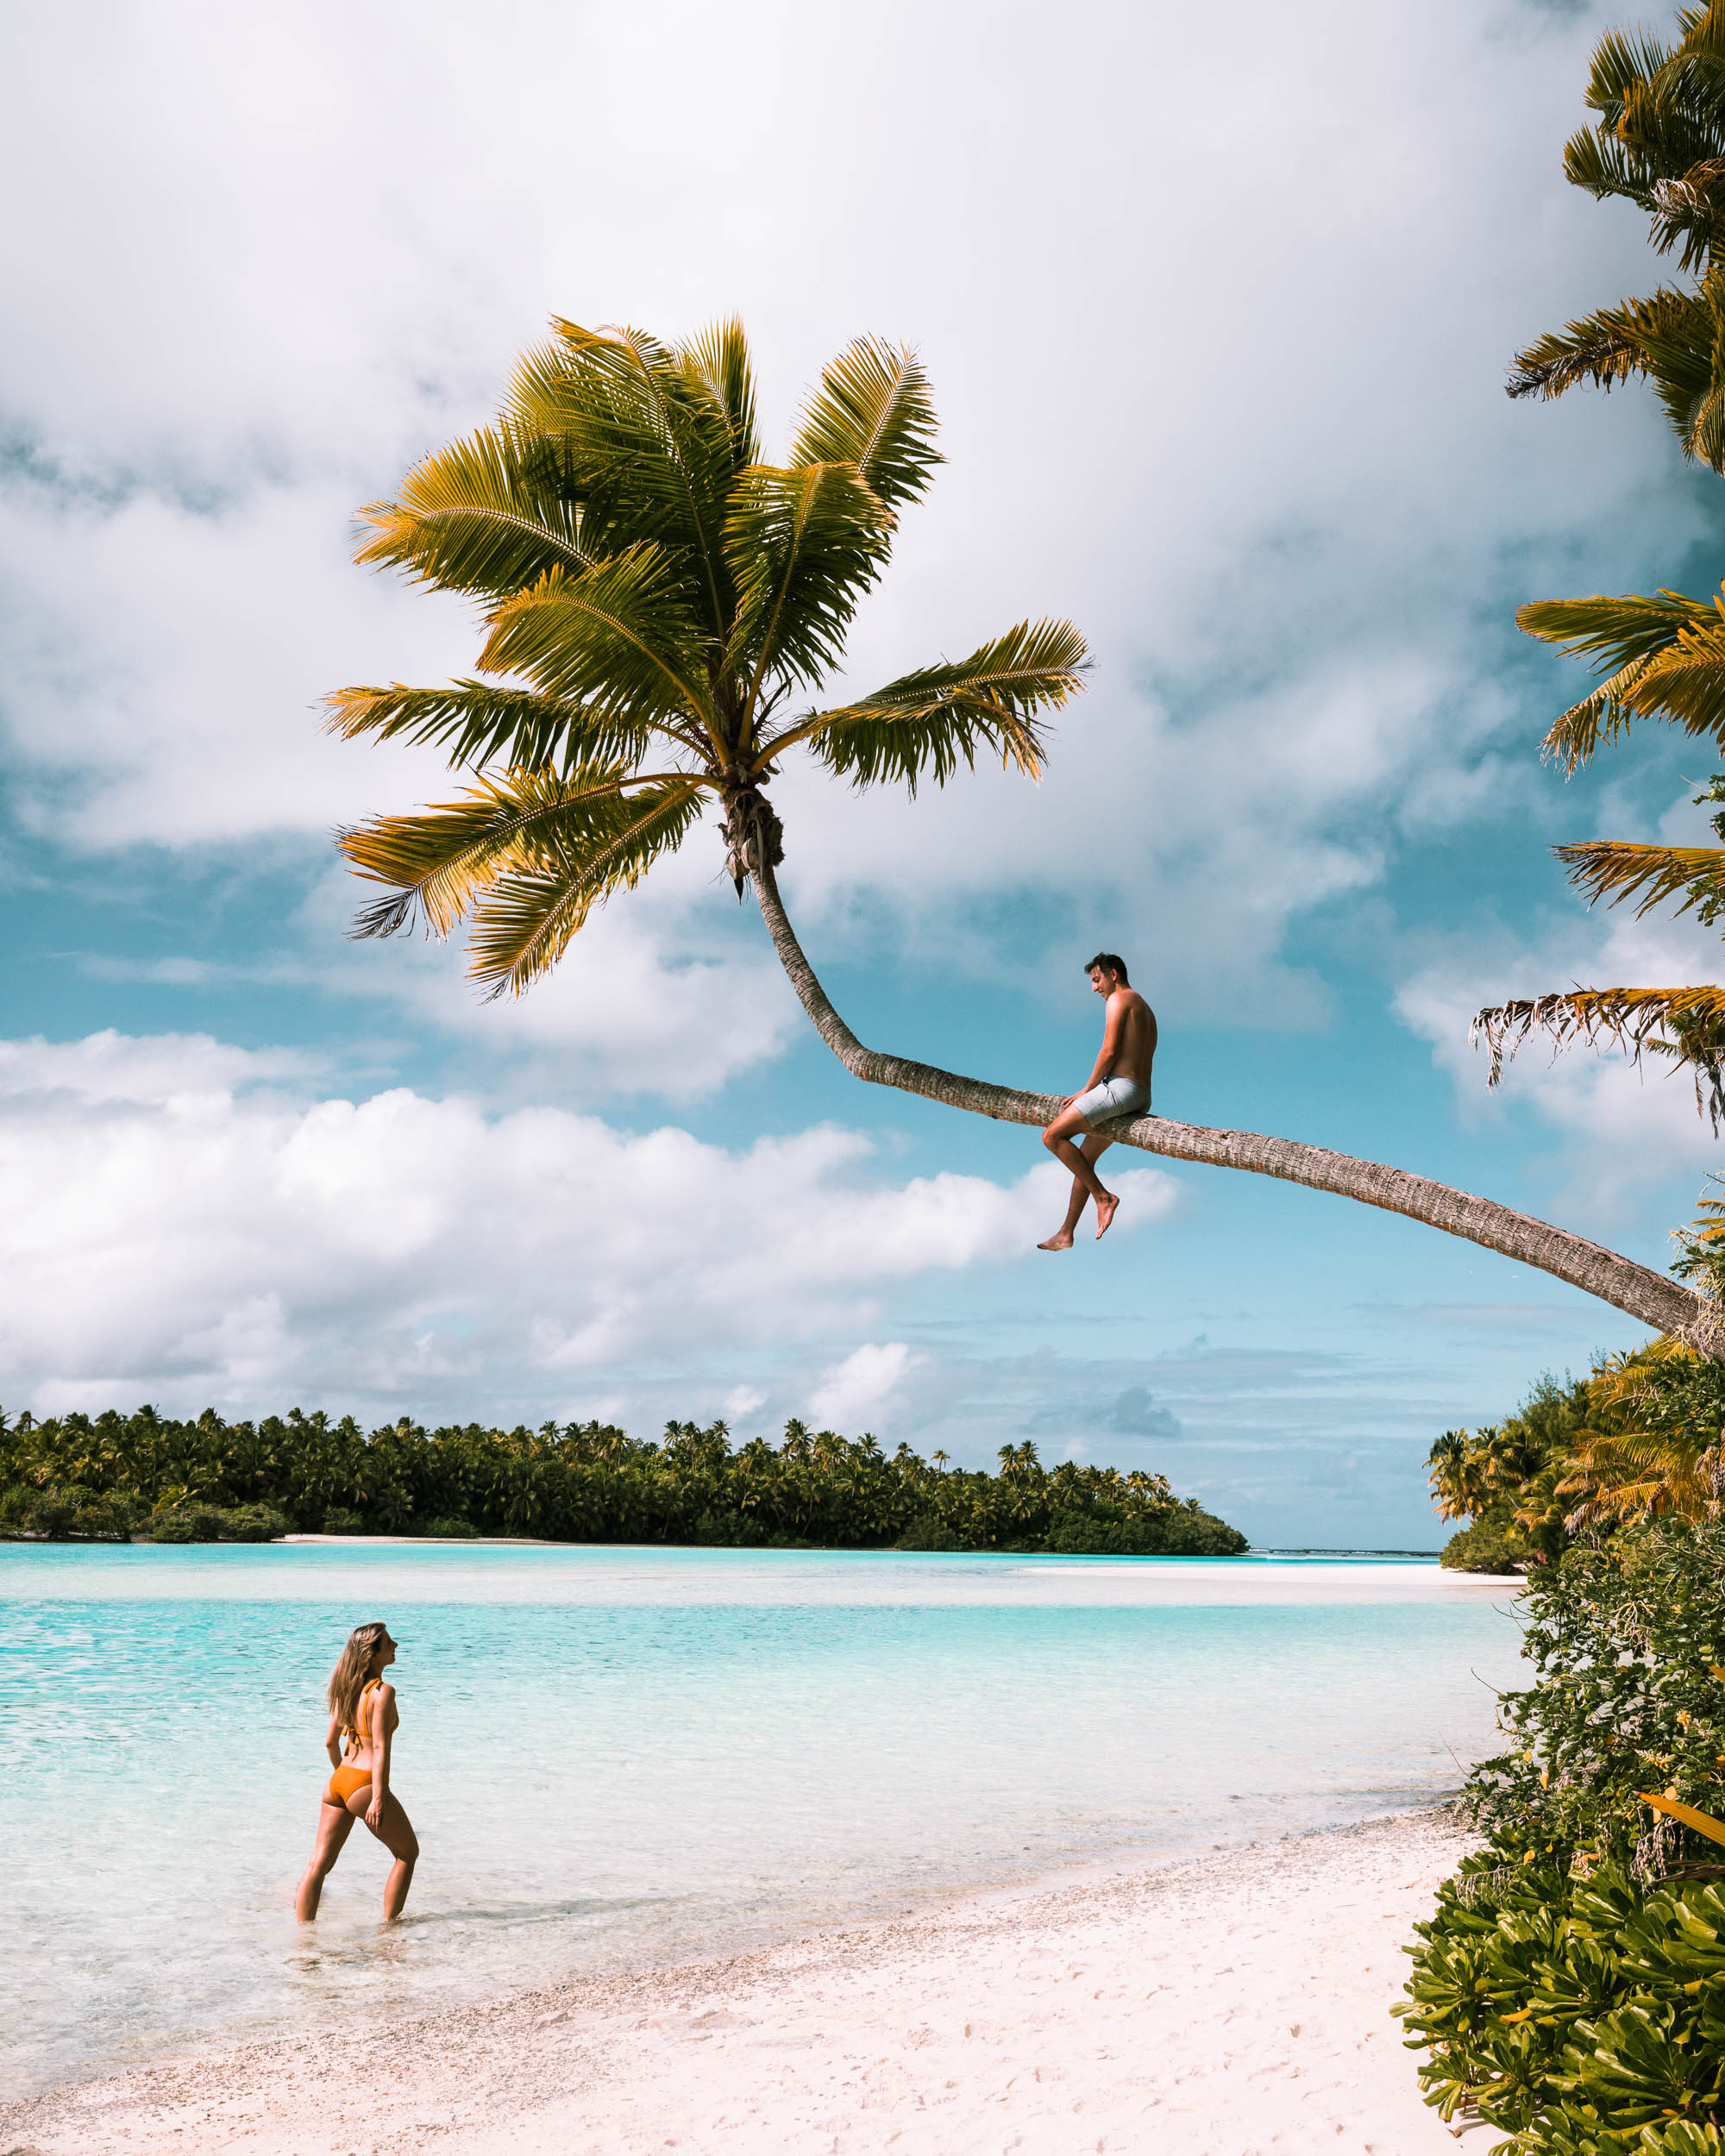 Palm tree climbs and clear water with Selena and Jacob Taylor at One Foot Island in the Cook Islands